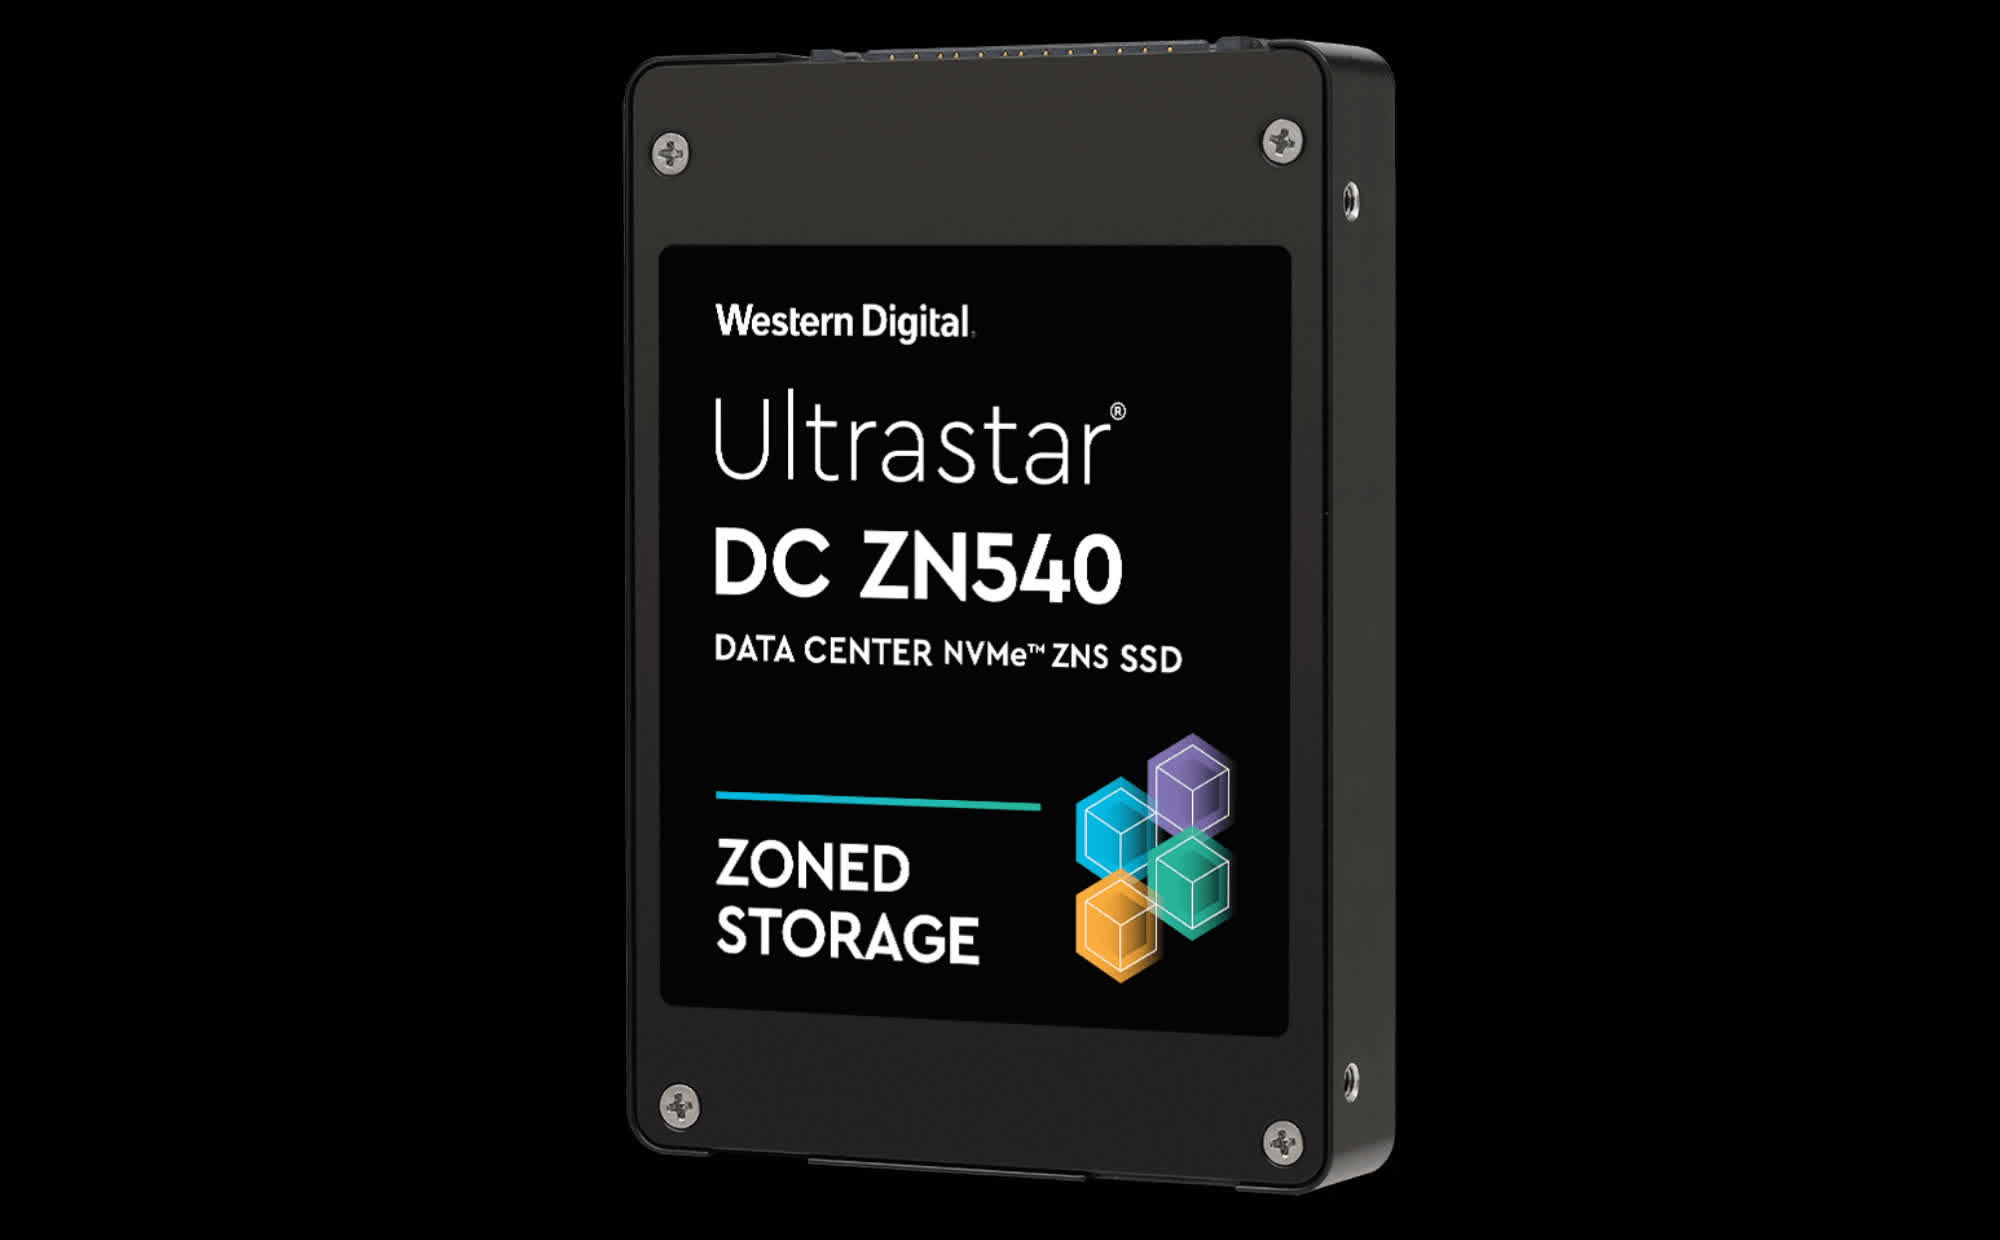 Western Digital unveils the Ultrastar DC ZN540, the world's first ZNS SSD